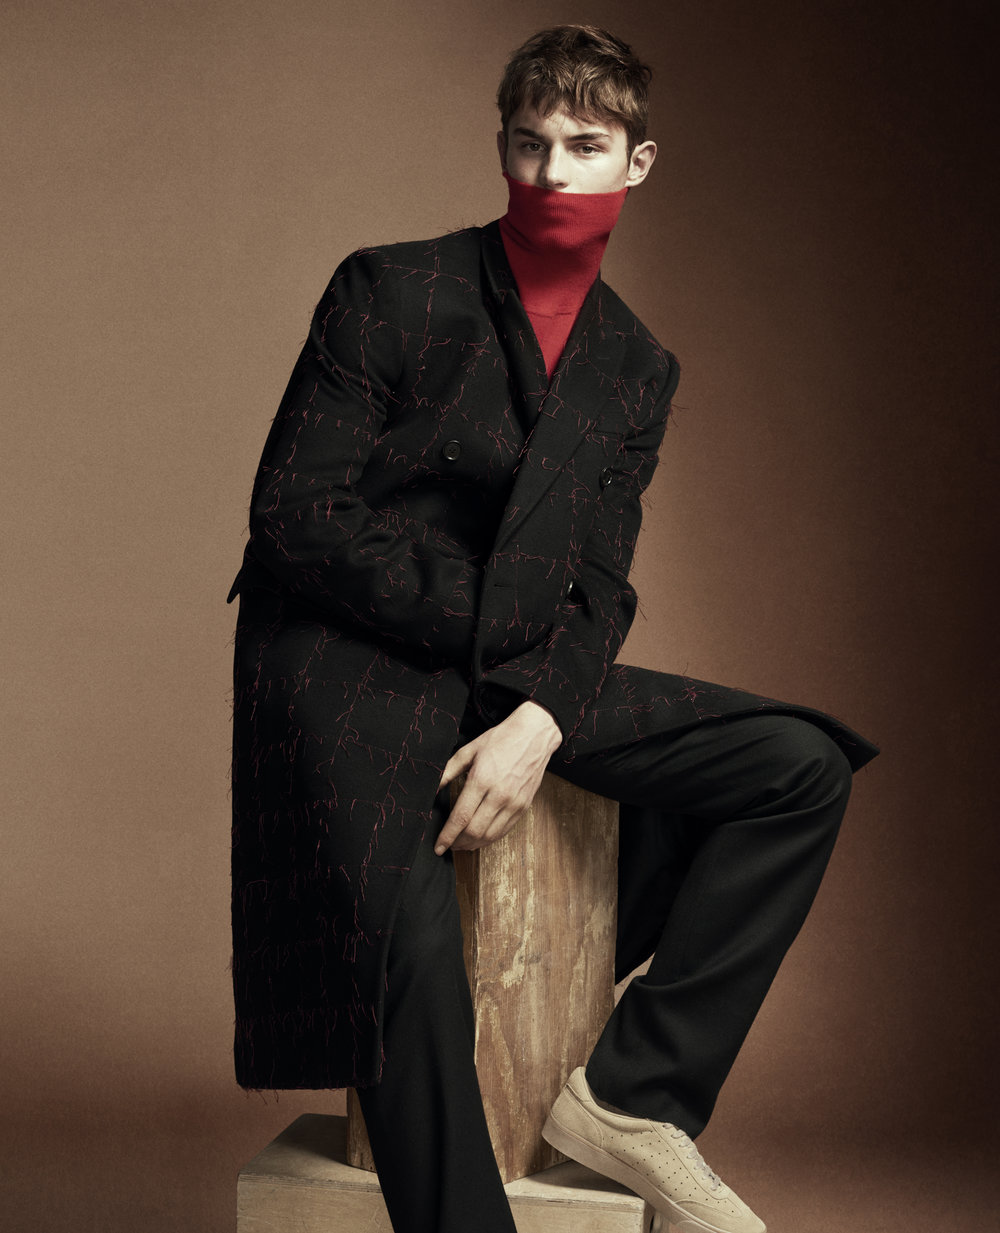 WOOL Issue 4 with Kit Butler a New Season Style - Fashionably Male